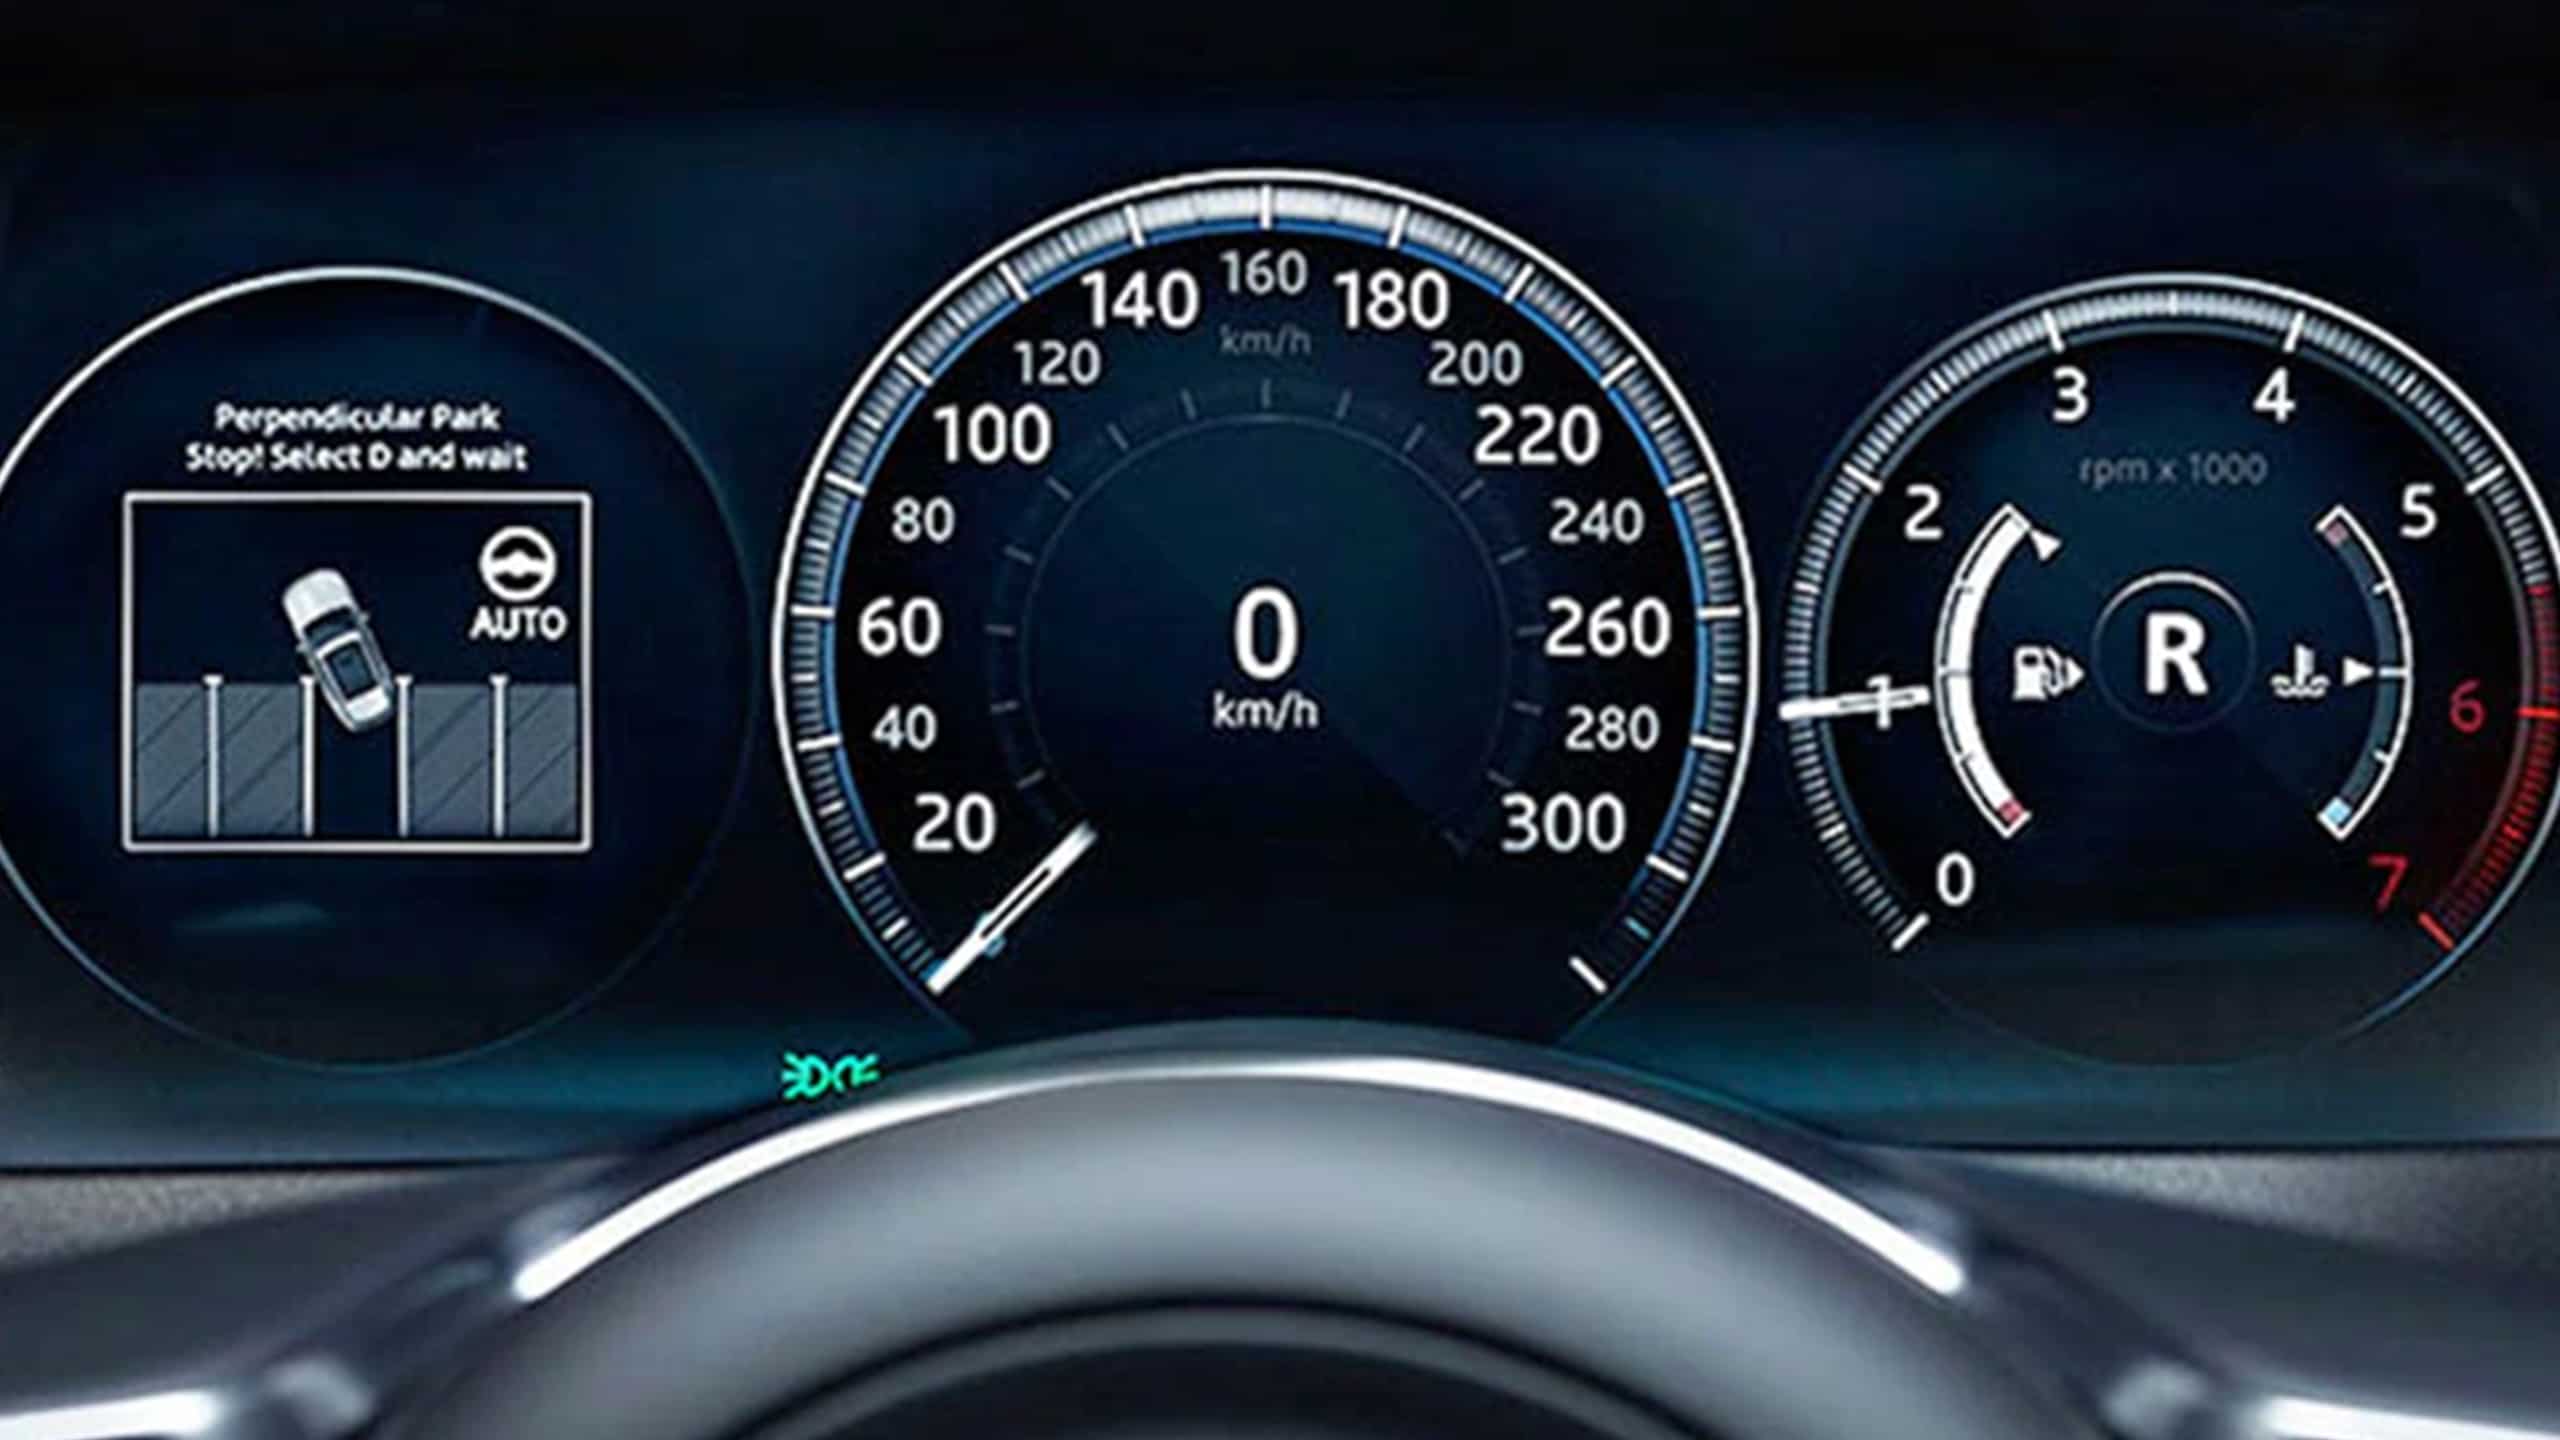 Driver display showing park assistance